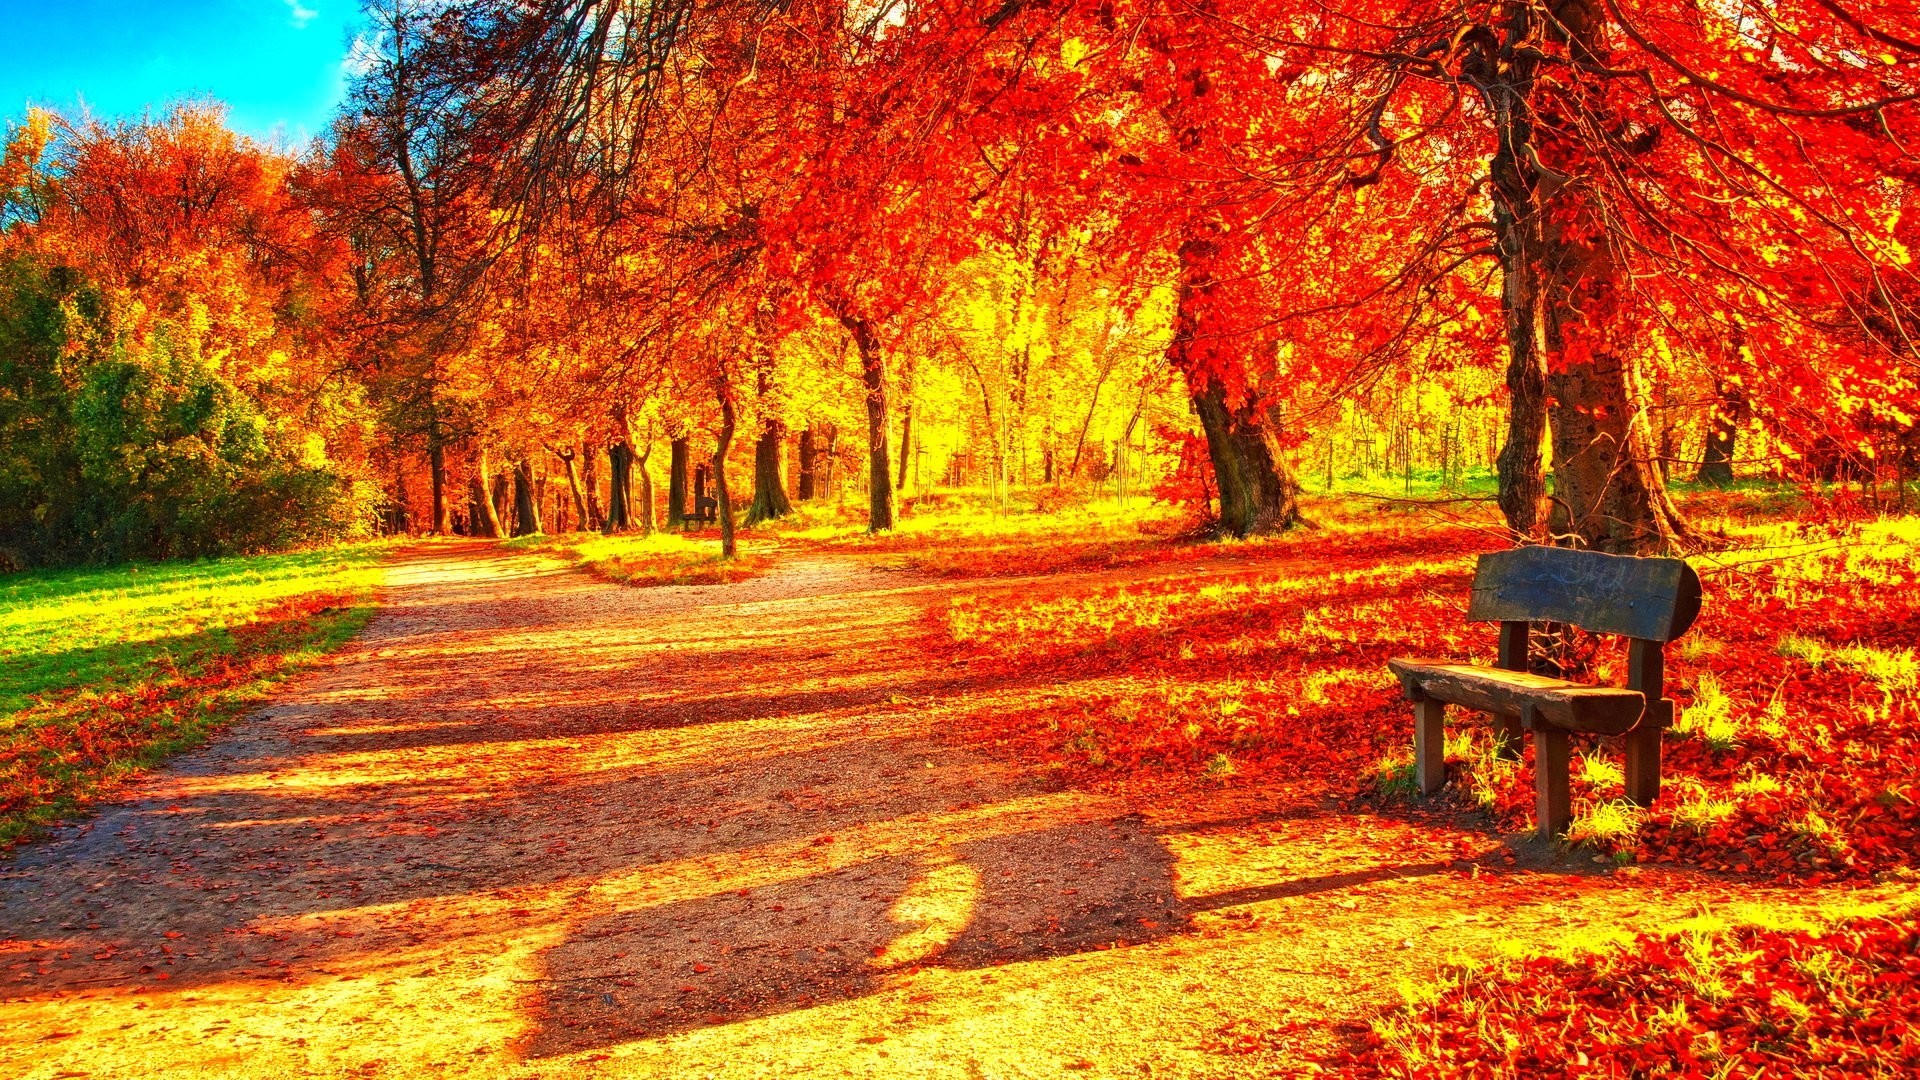 1920x1080 Fall Tag - Tree Landscape Autumn Season Nature Fall Forest Color Hd  Beautiful Scenery Download for